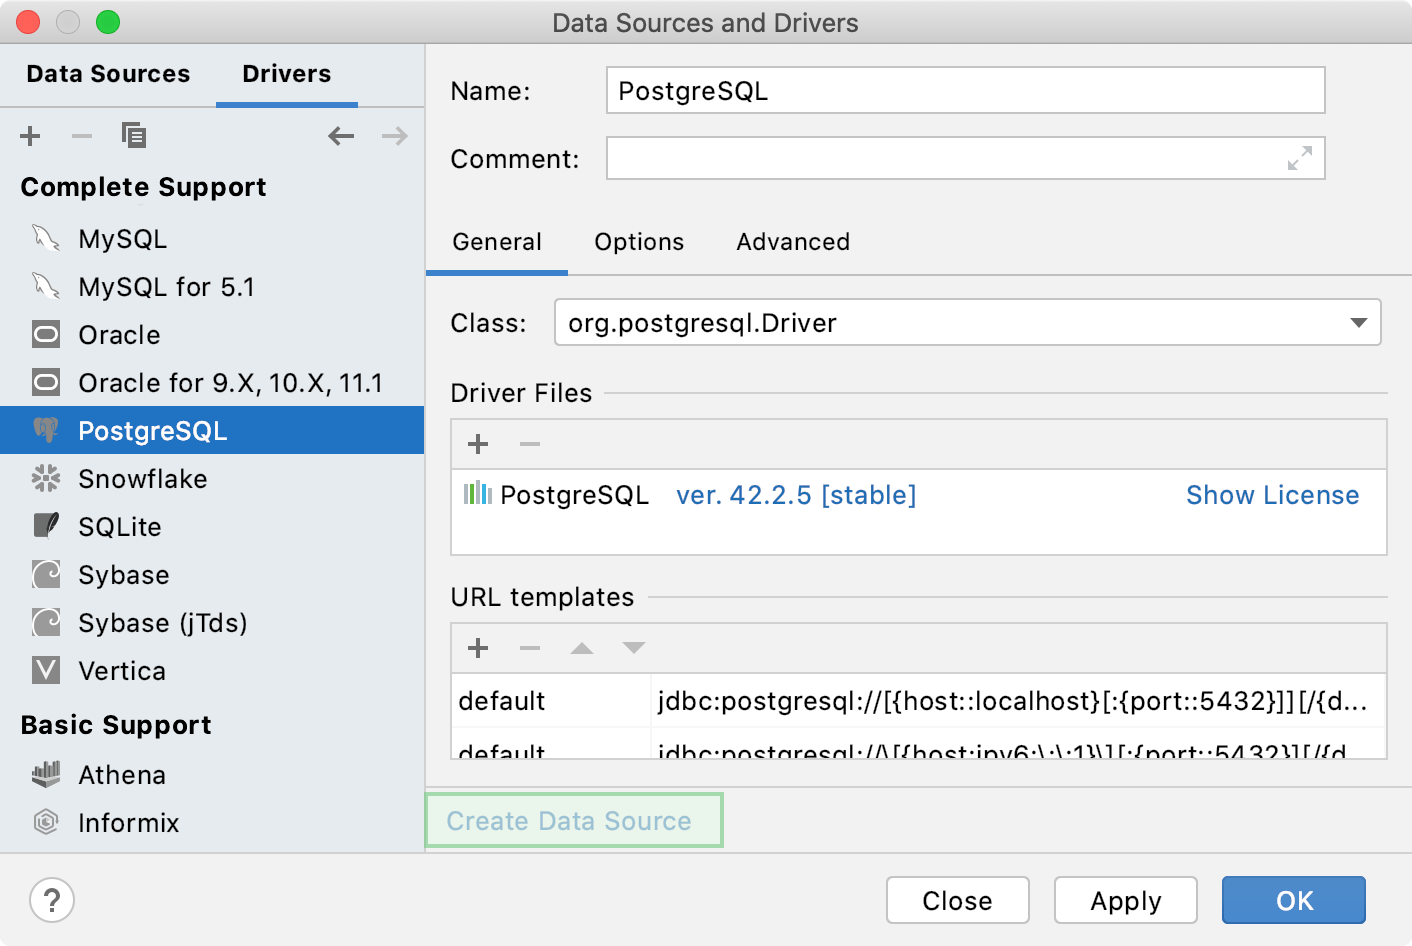 Create Data Source</for></control> link